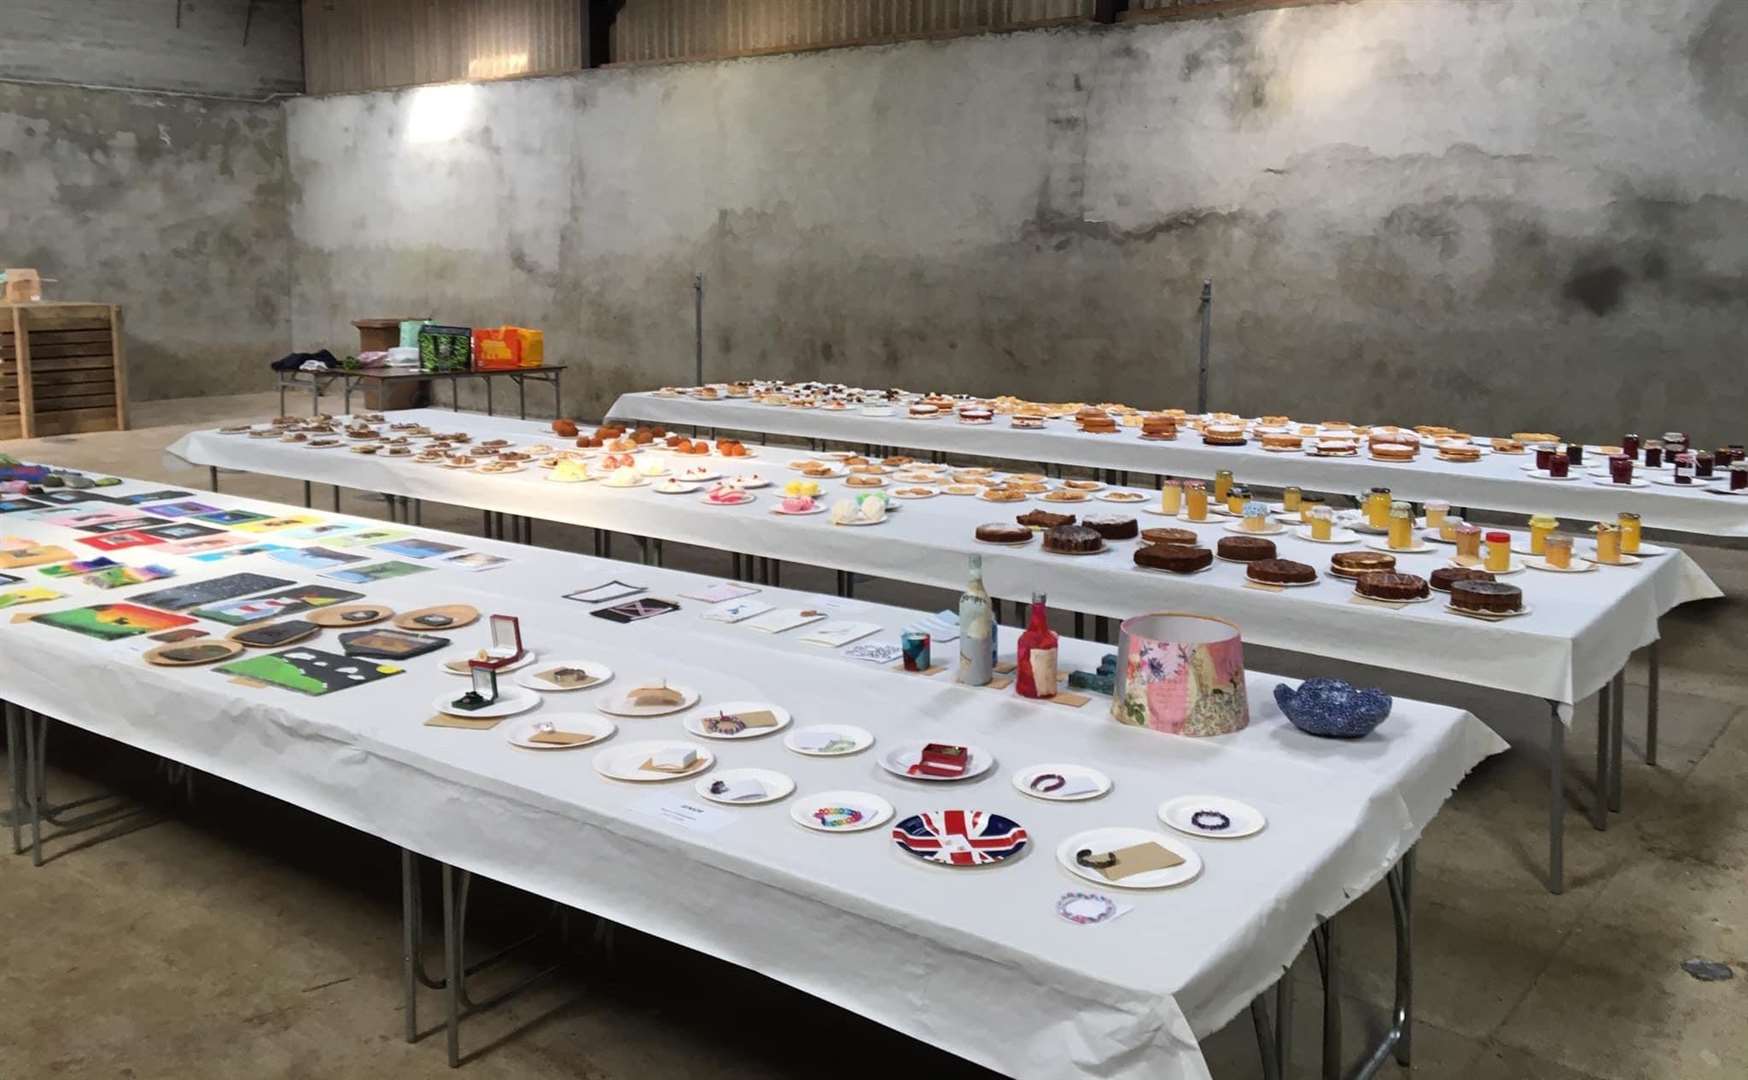 A display of baking and industrial entries.